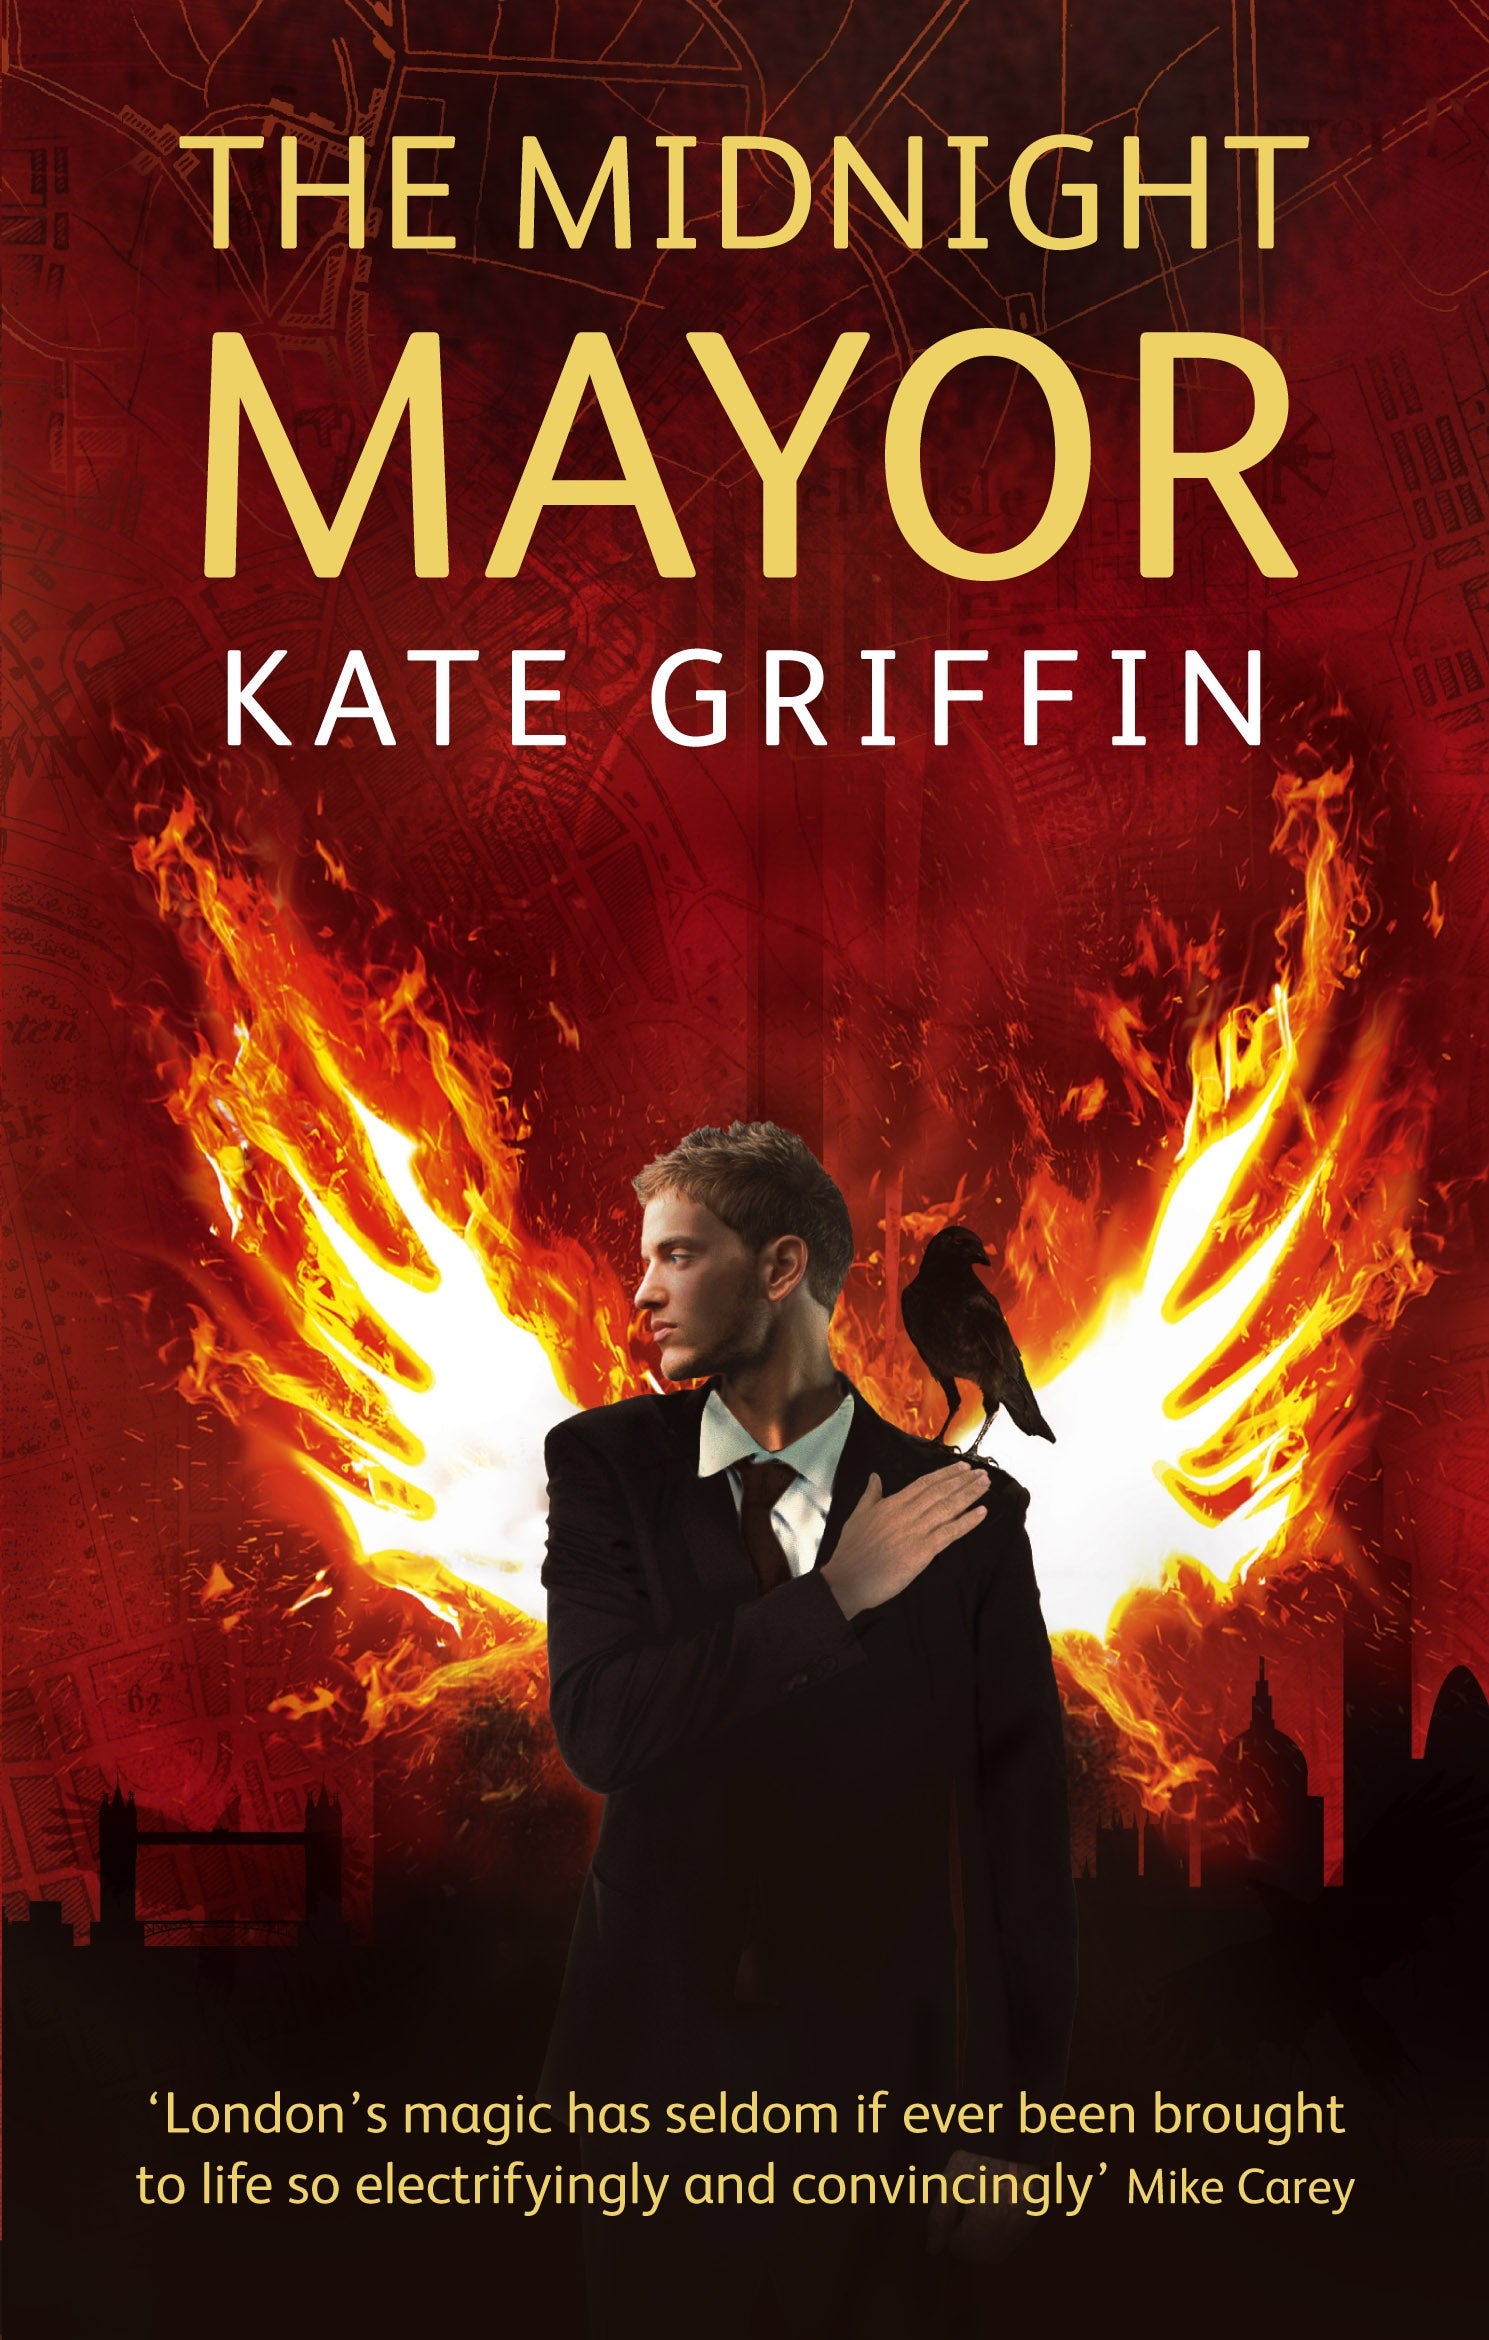 The Midnight Mayor by Kate Griffin